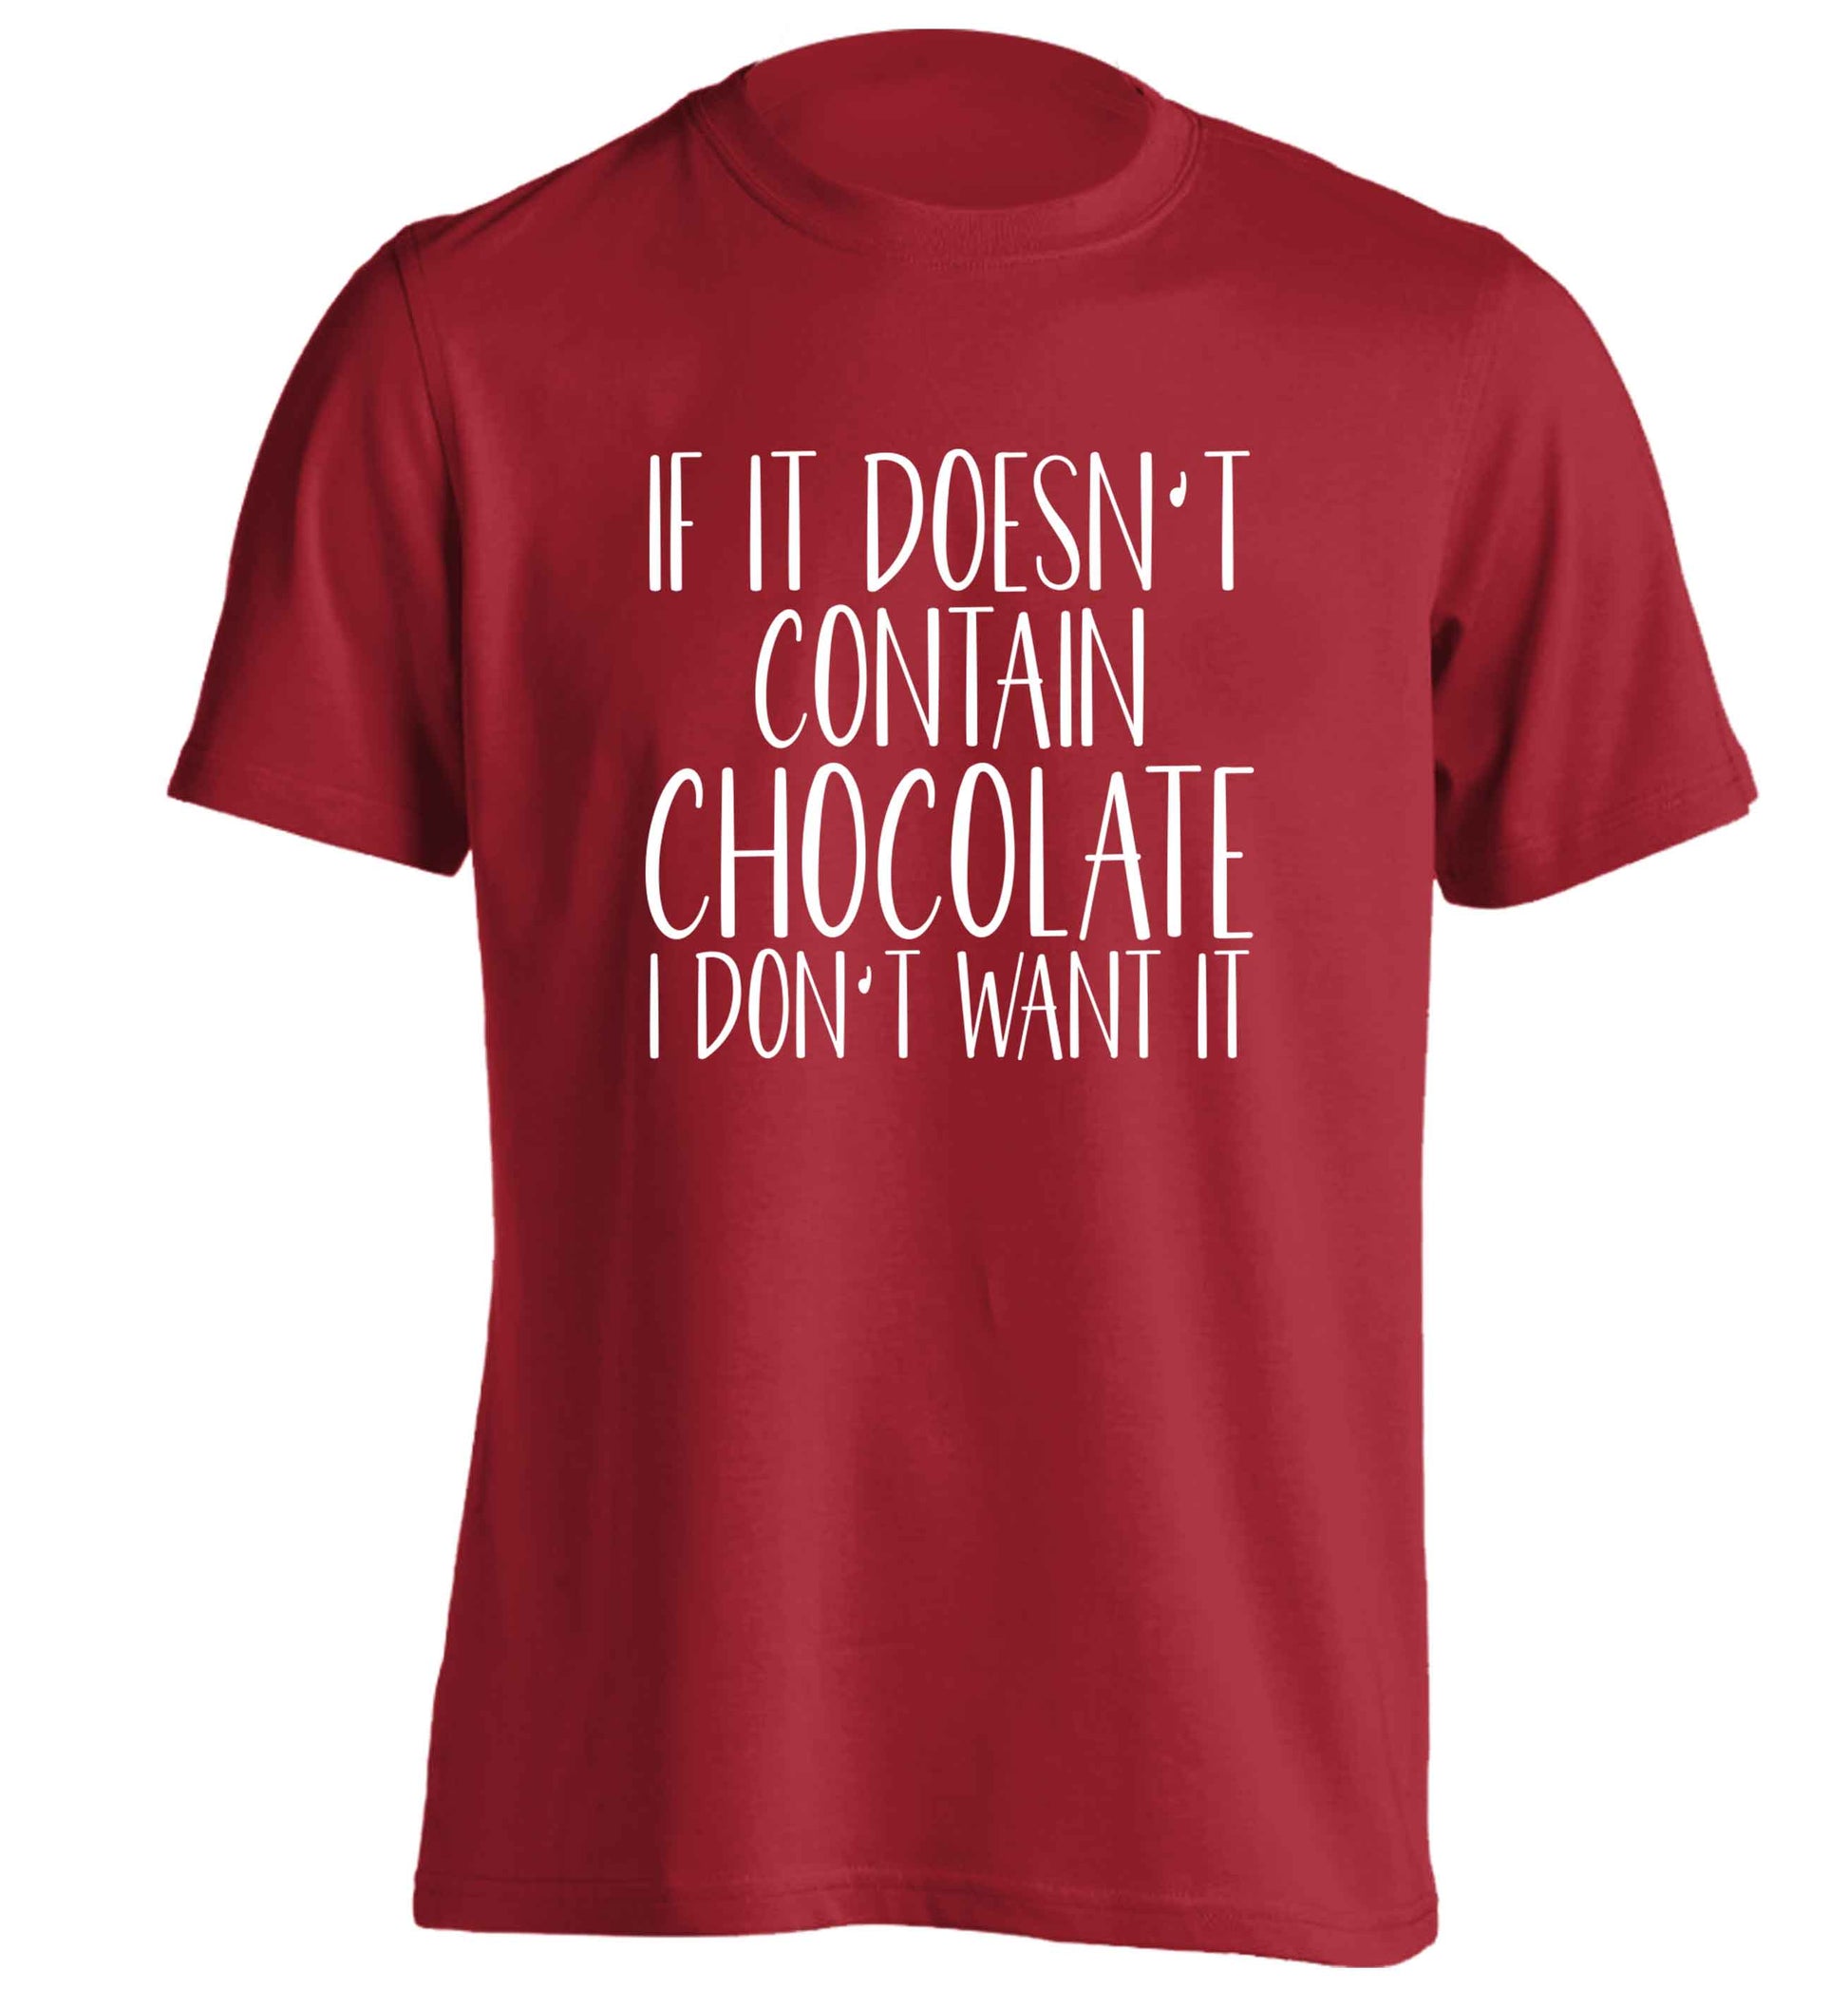 If it doesn't contain chocolate I don't want it adults unisex red Tshirt 2XL